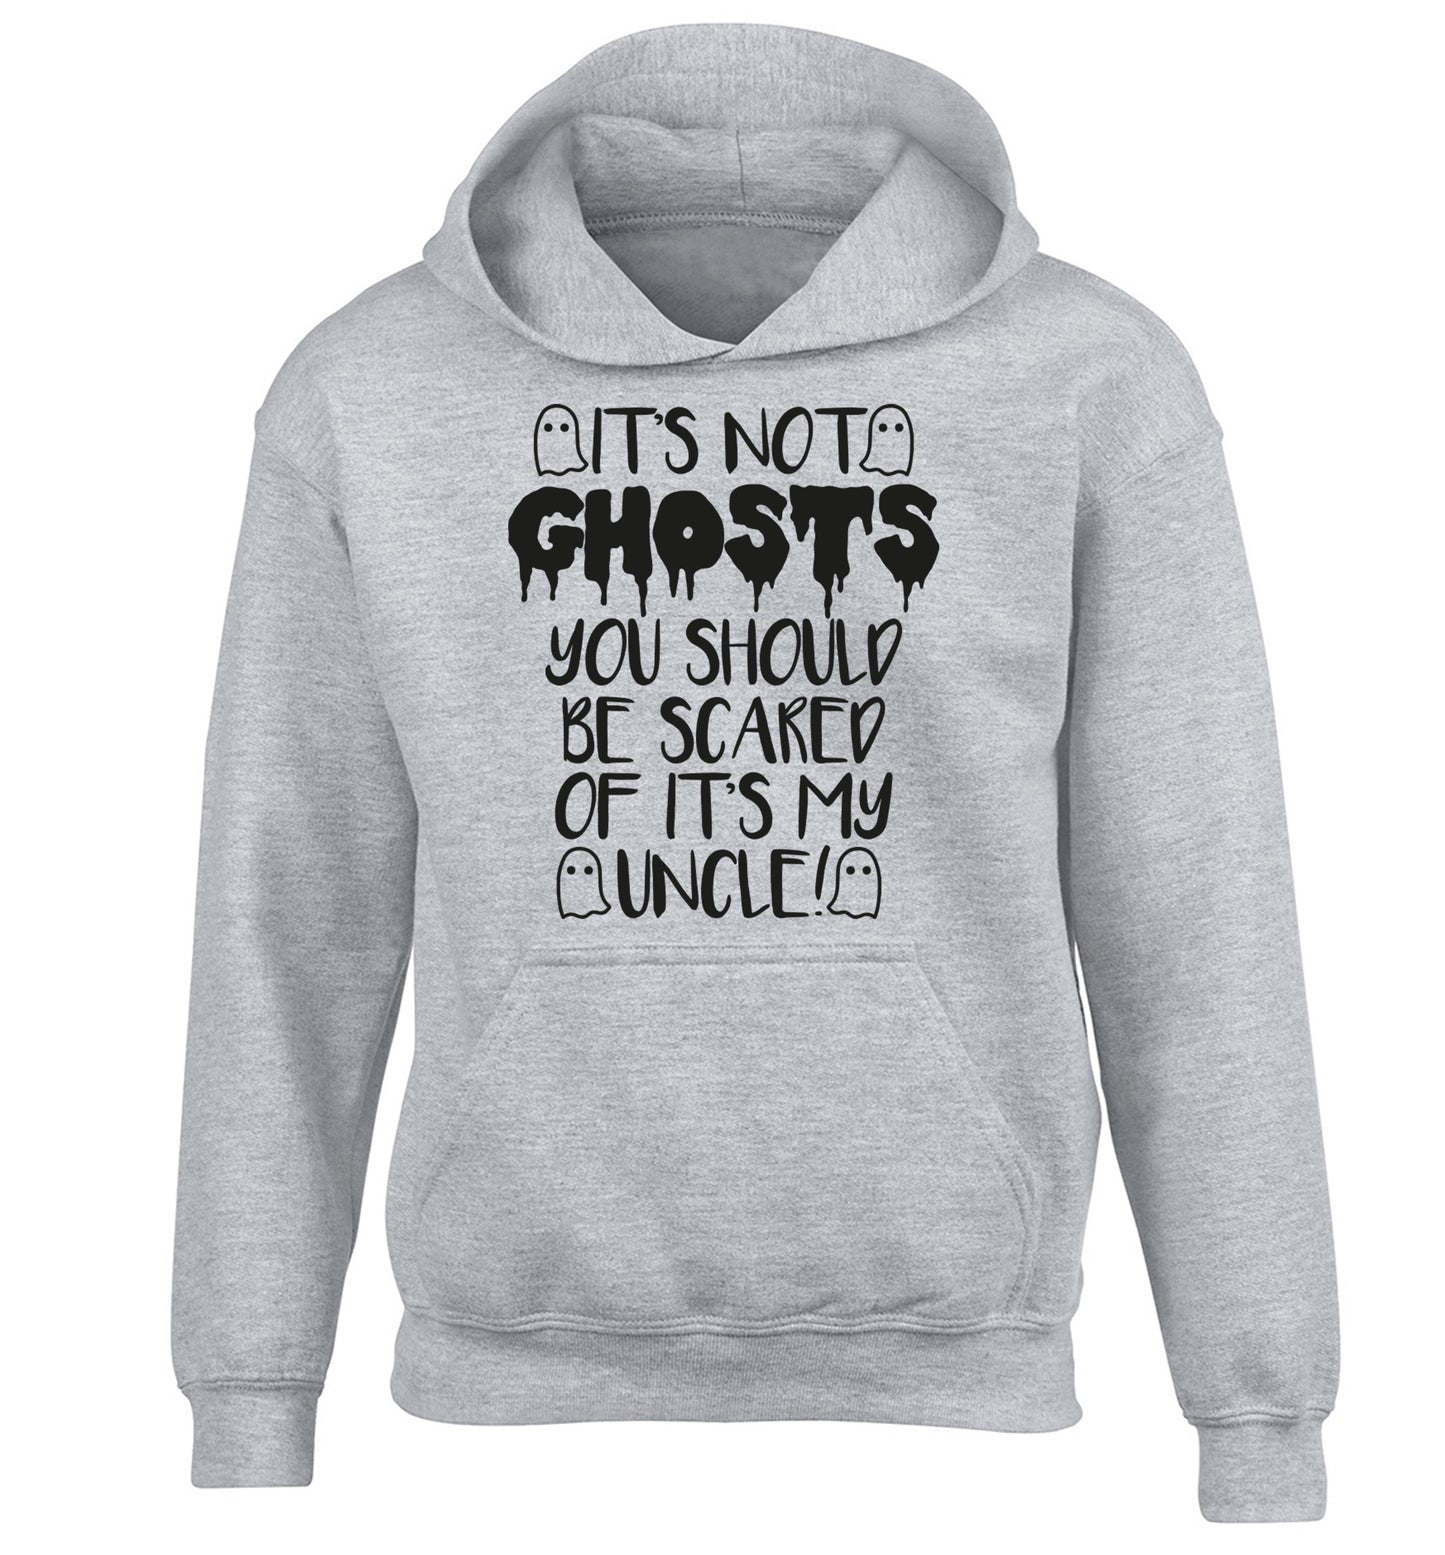 It's not ghosts you should be scared of it's my uncle! children's grey hoodie 12-14 Years